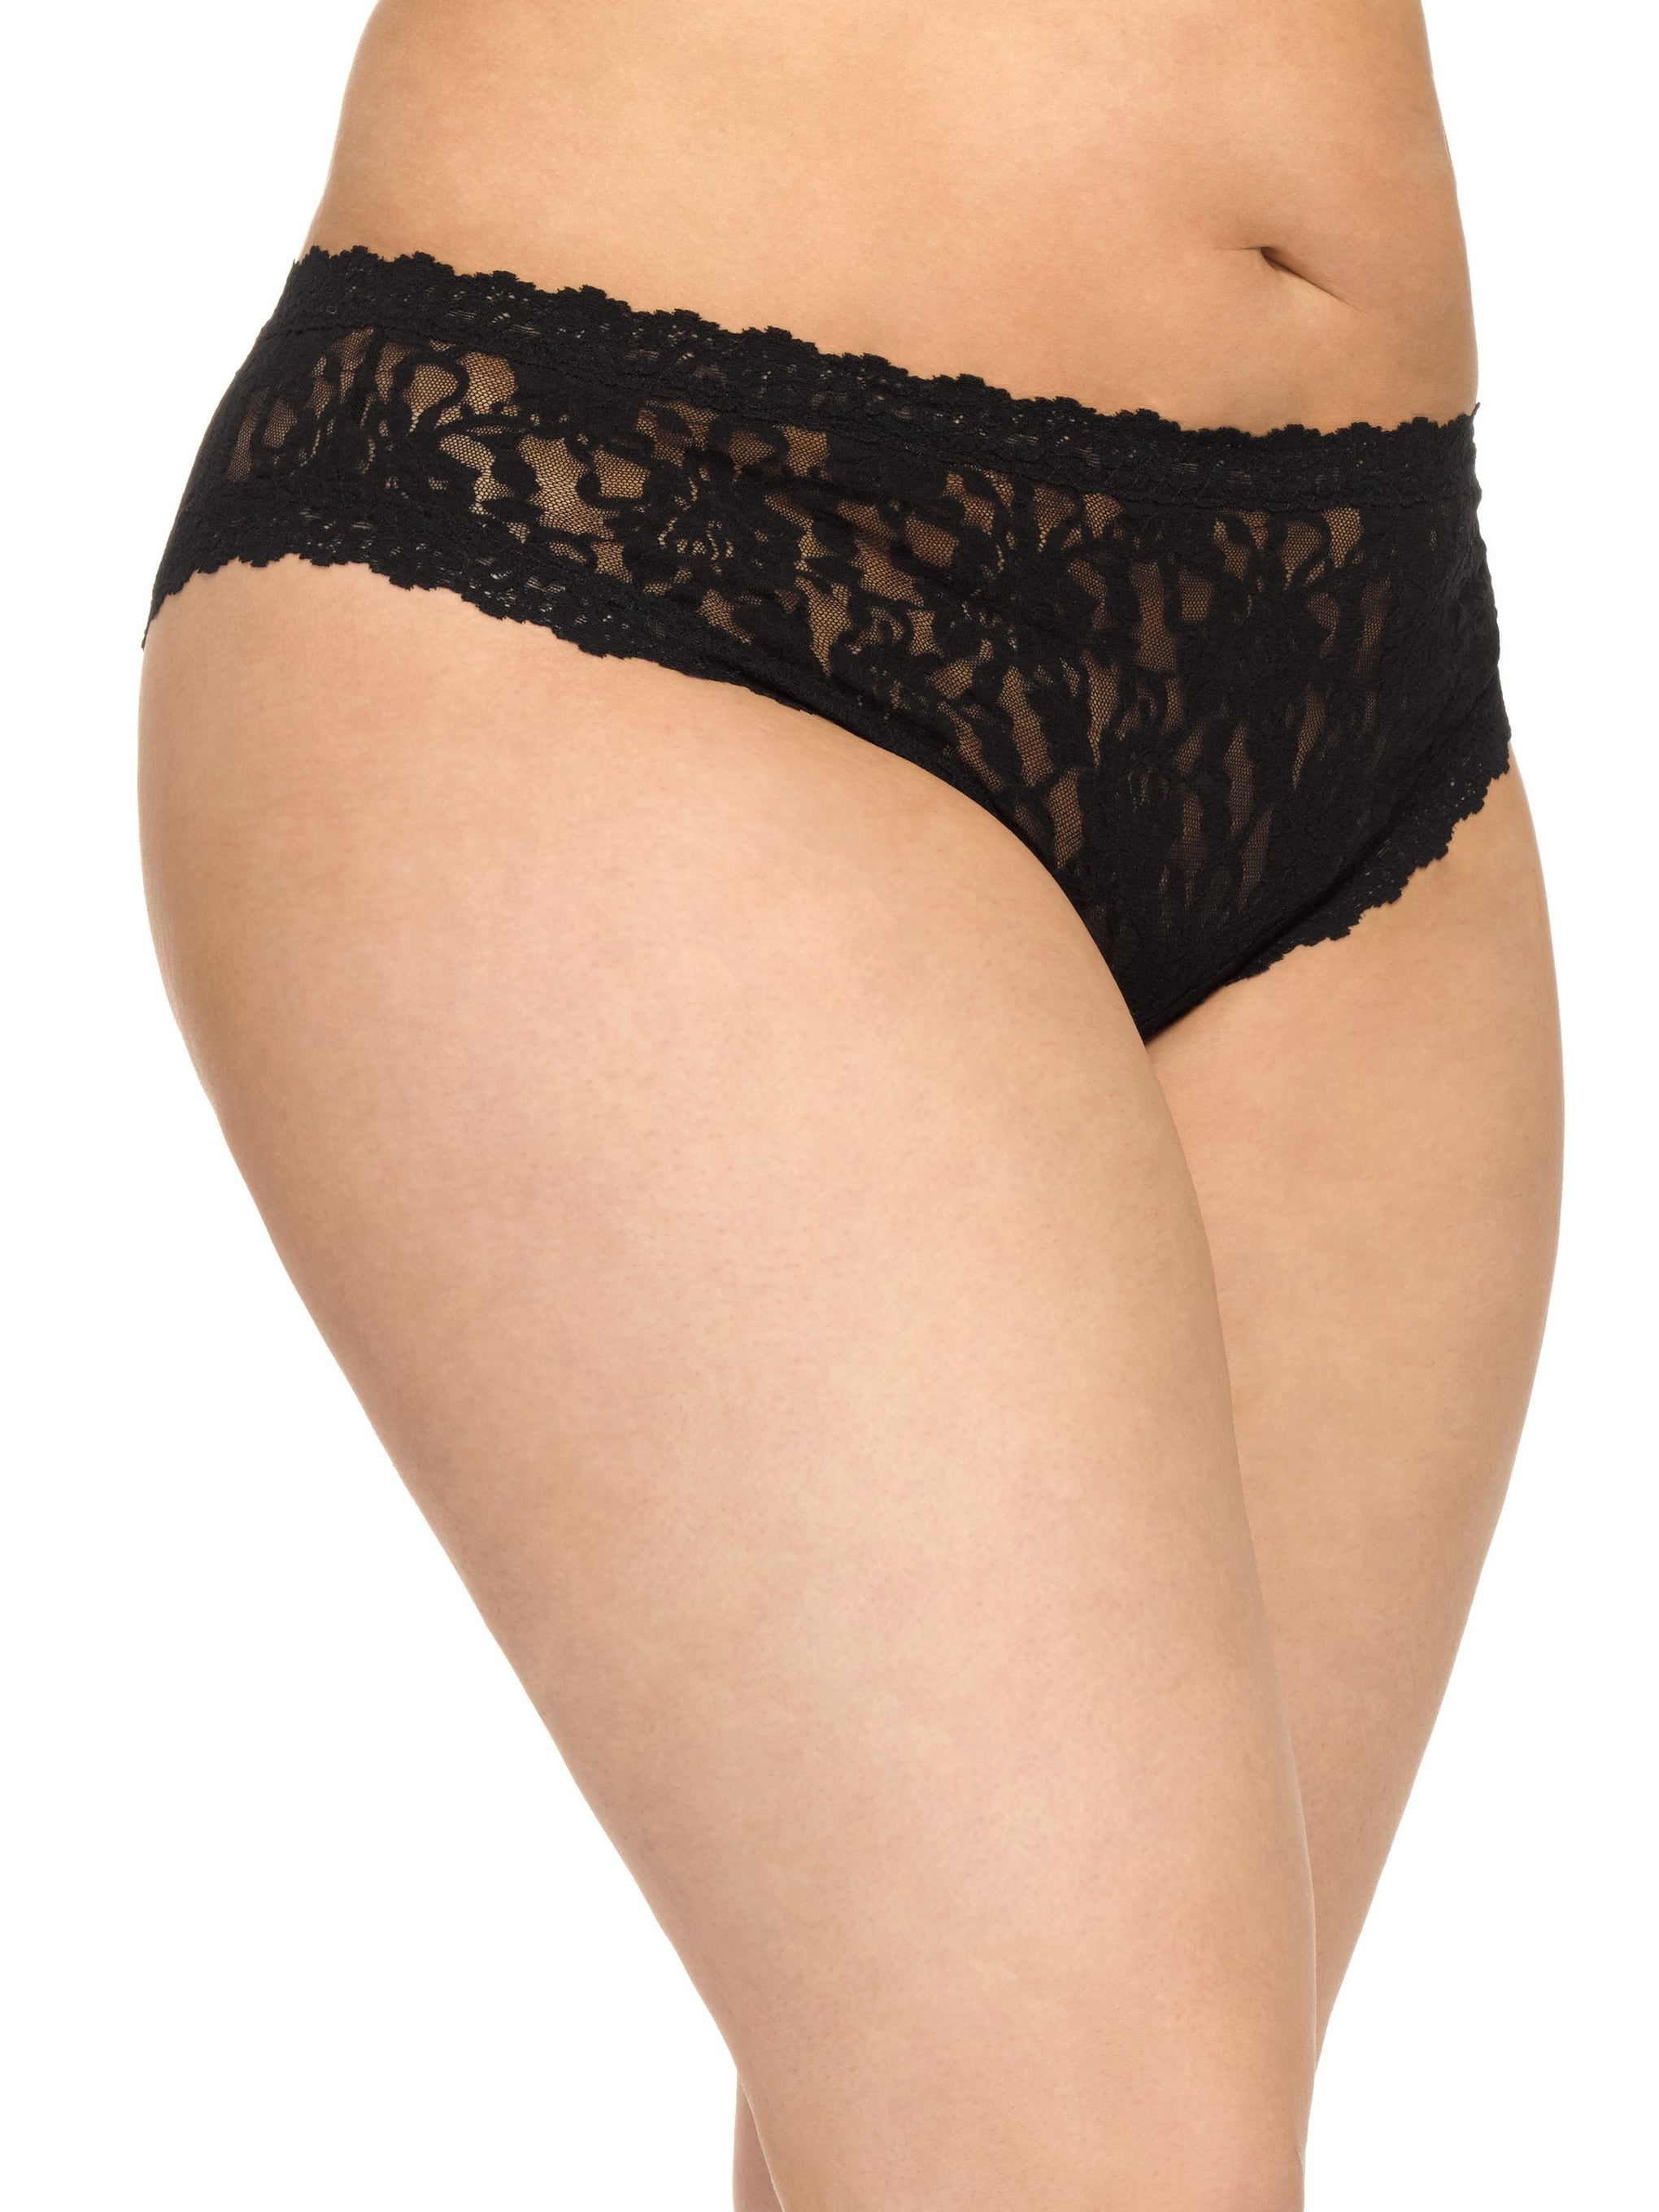 Black Bow Womens 5-Pack High Waist Brief with Lace, Black Pack, X-Large